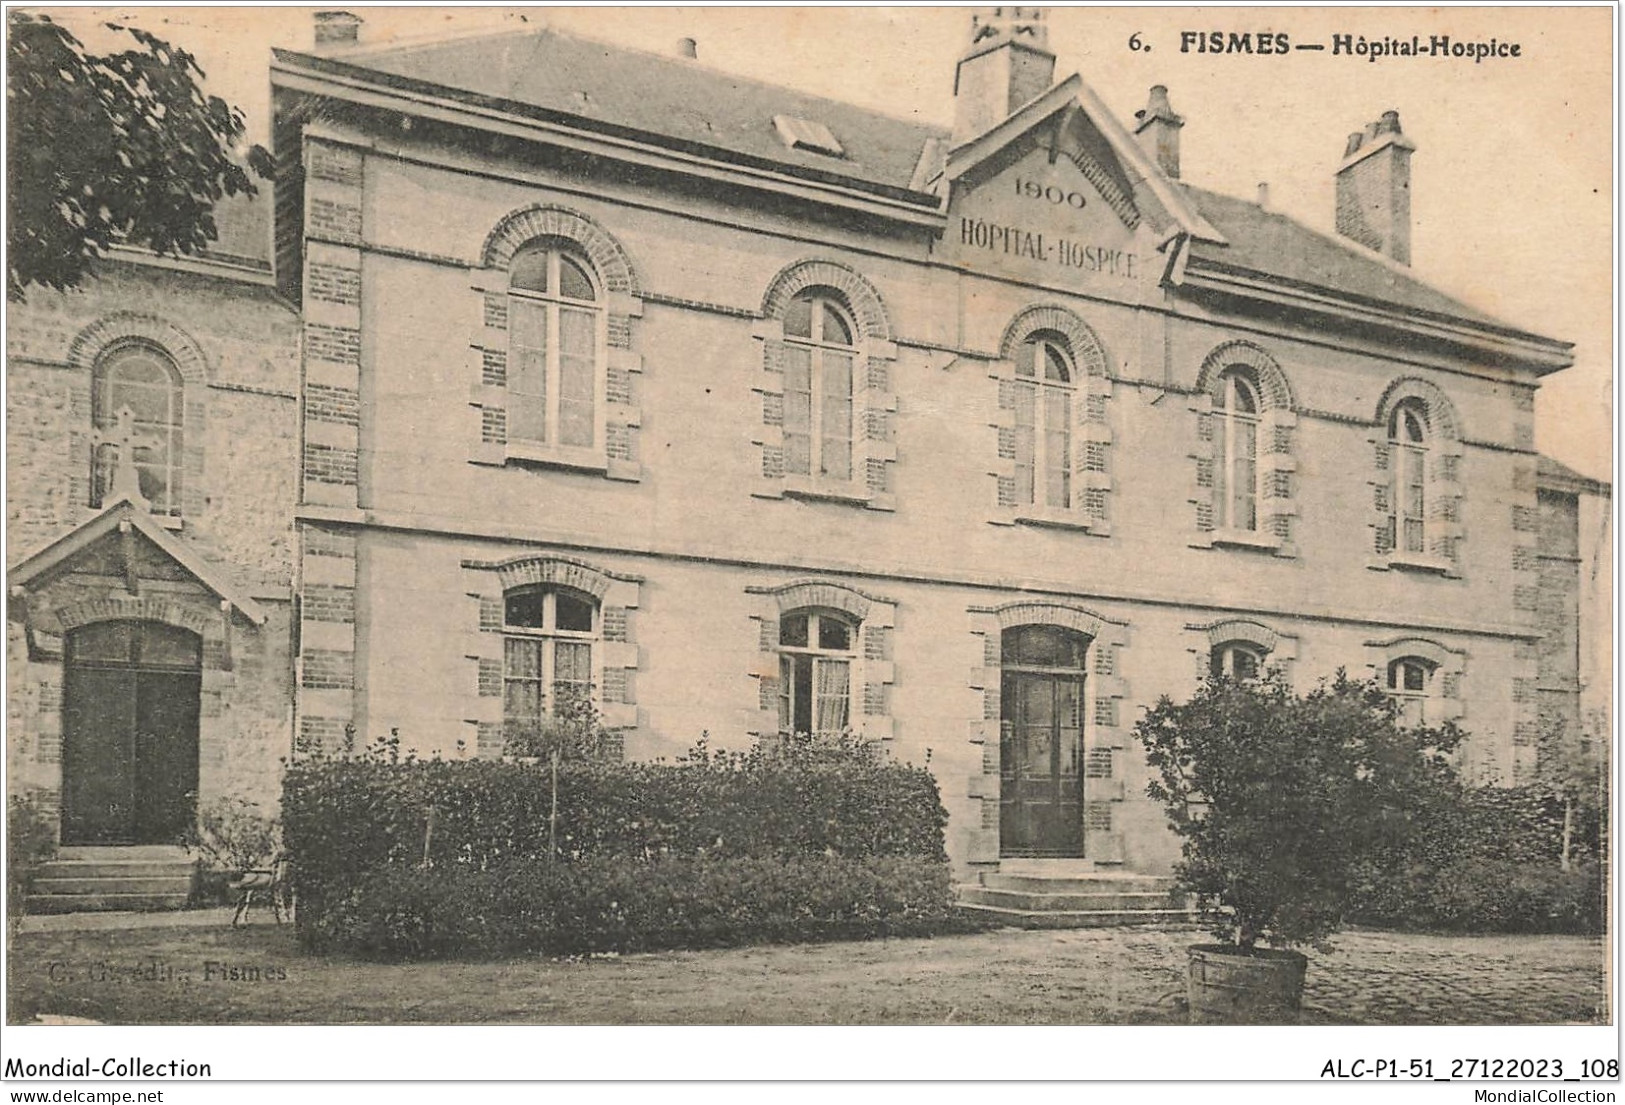 ALCP1-51-0055 - FISMES - Hopital-hospice - Fismes